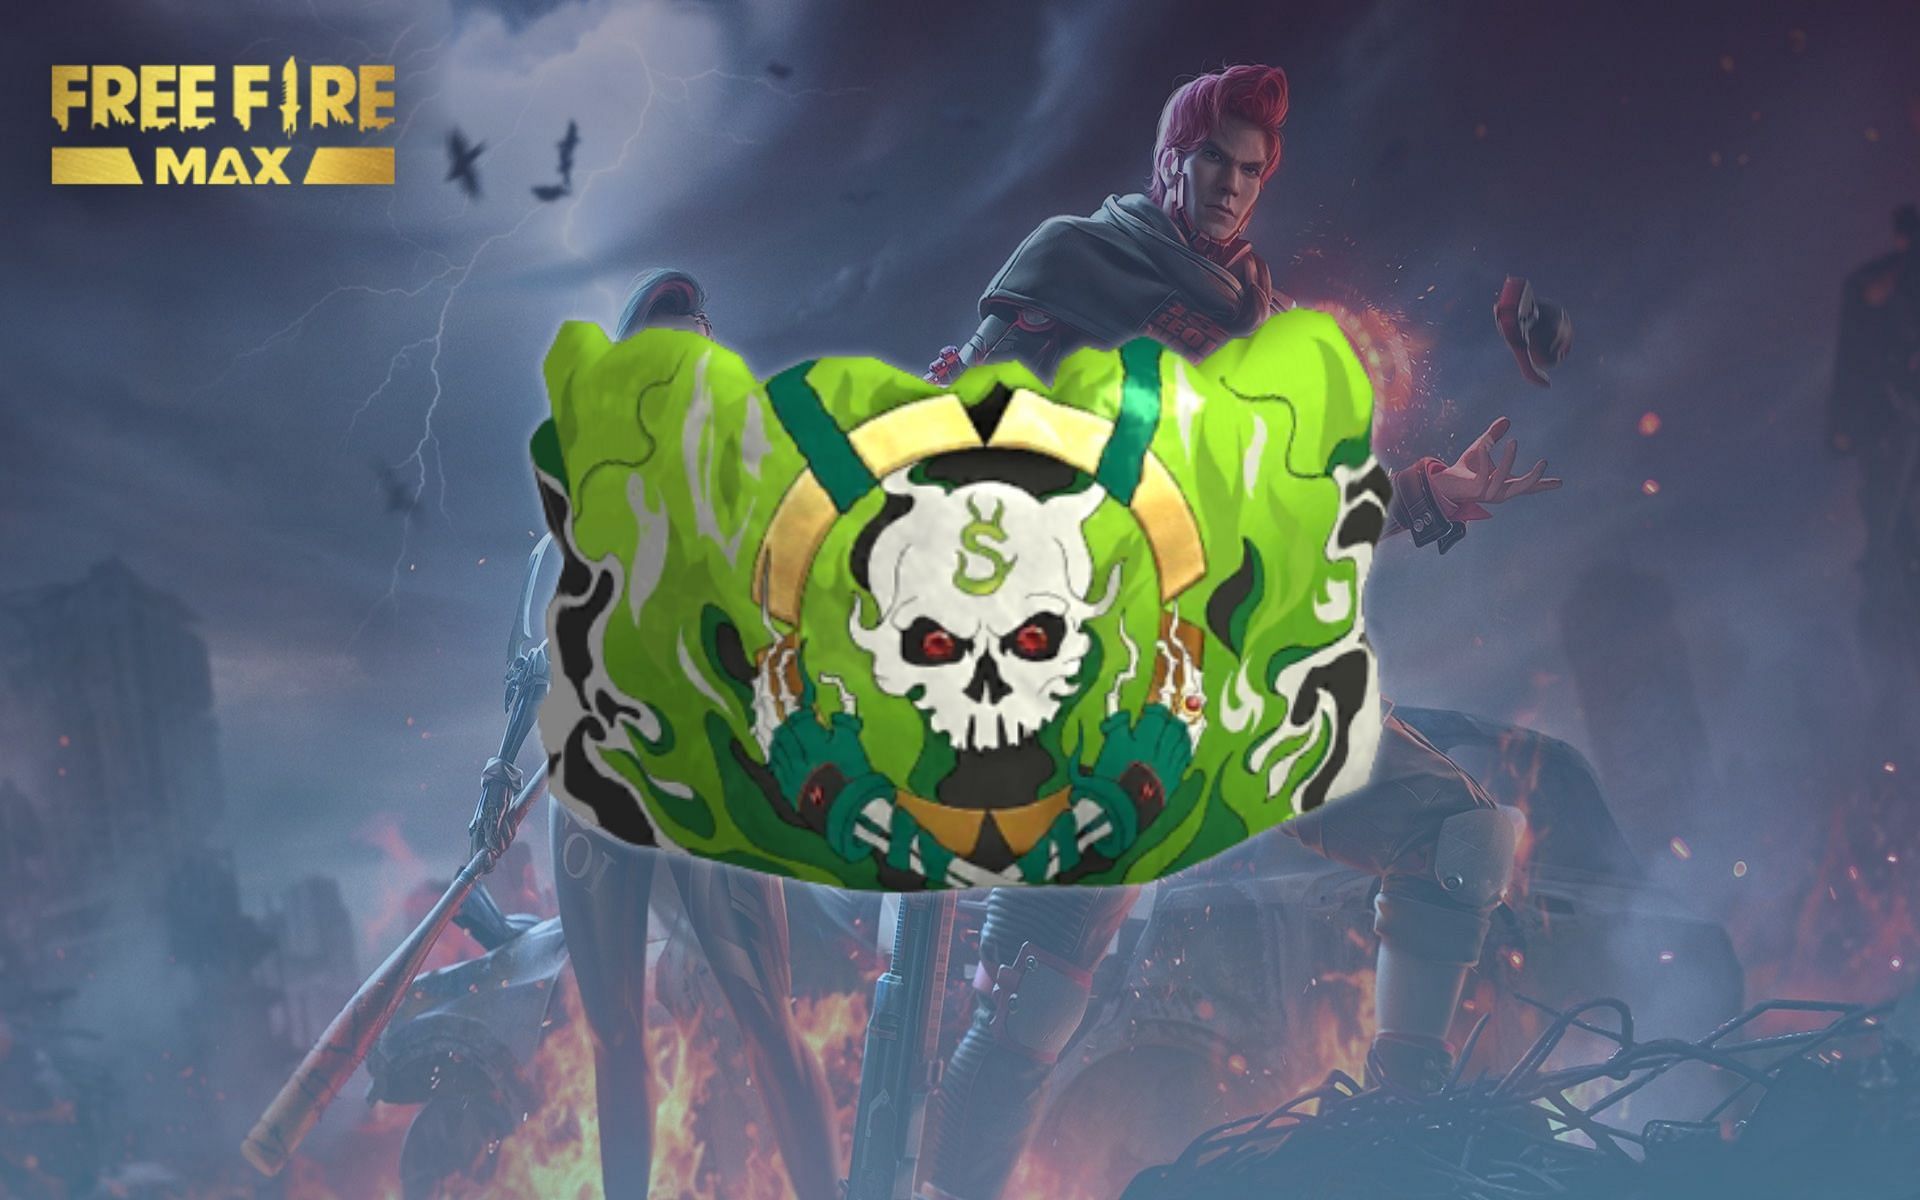 The free Gloo Wall skin in the event (Image via Garena)